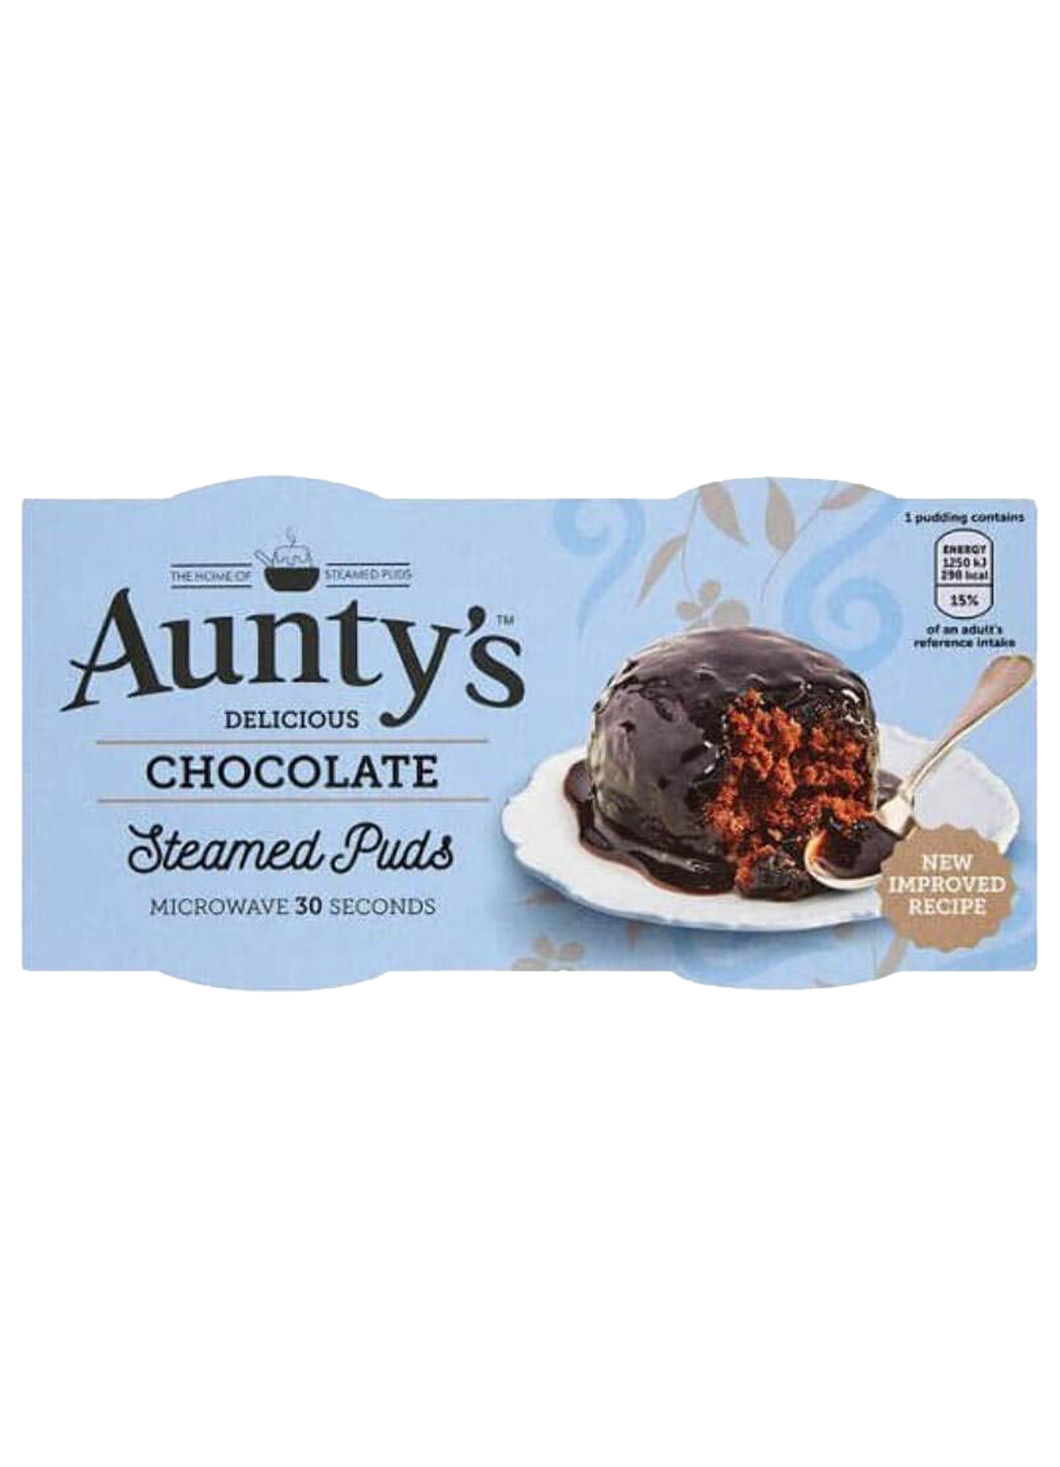 Aunty's Chocolate Steamed Puds (2 Puddings) 190g